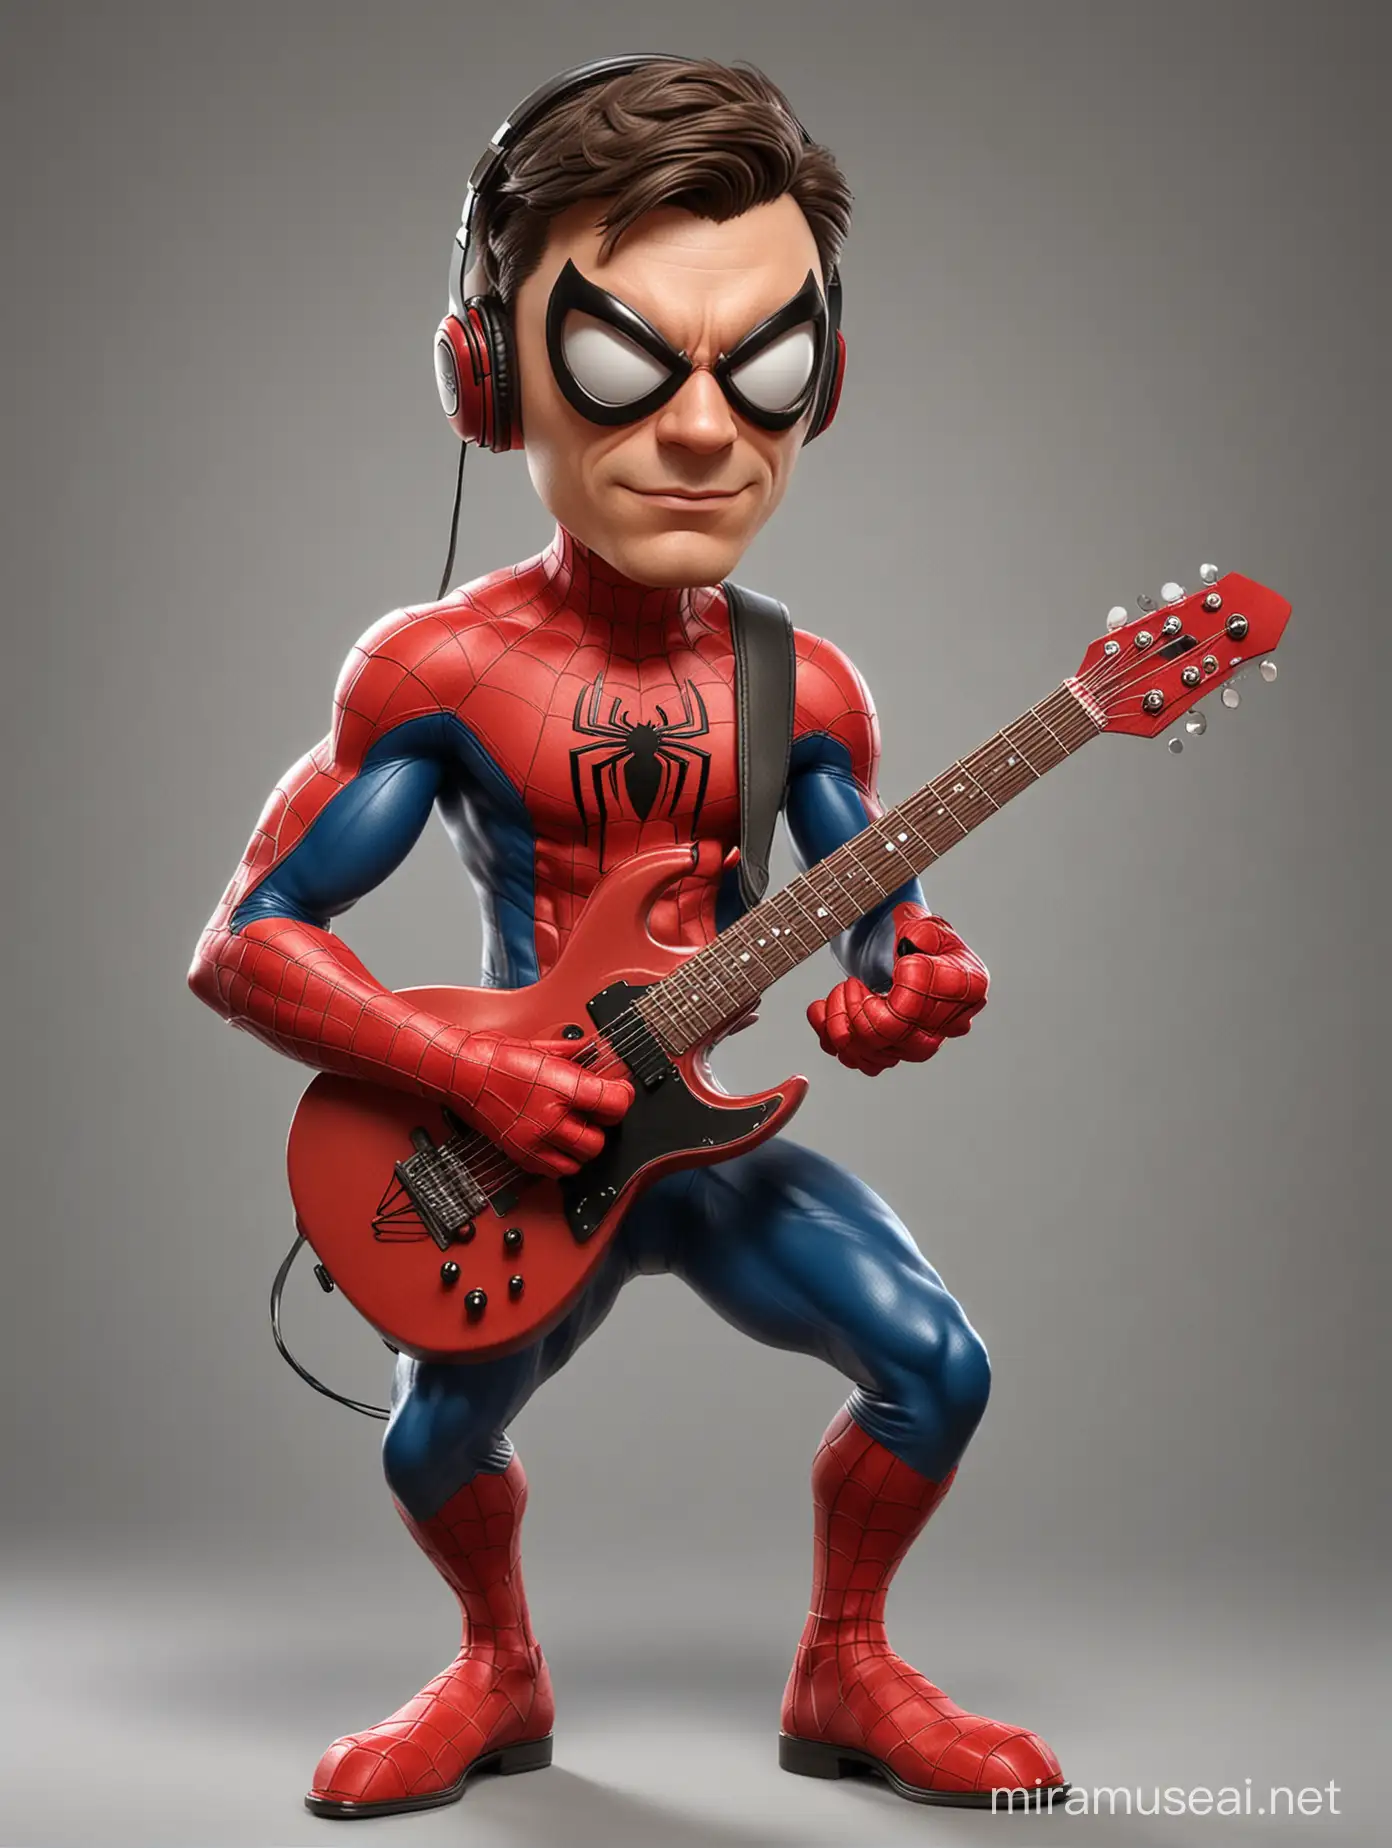 Spiderman Caricature Rocking Out with Guitar and Headphones